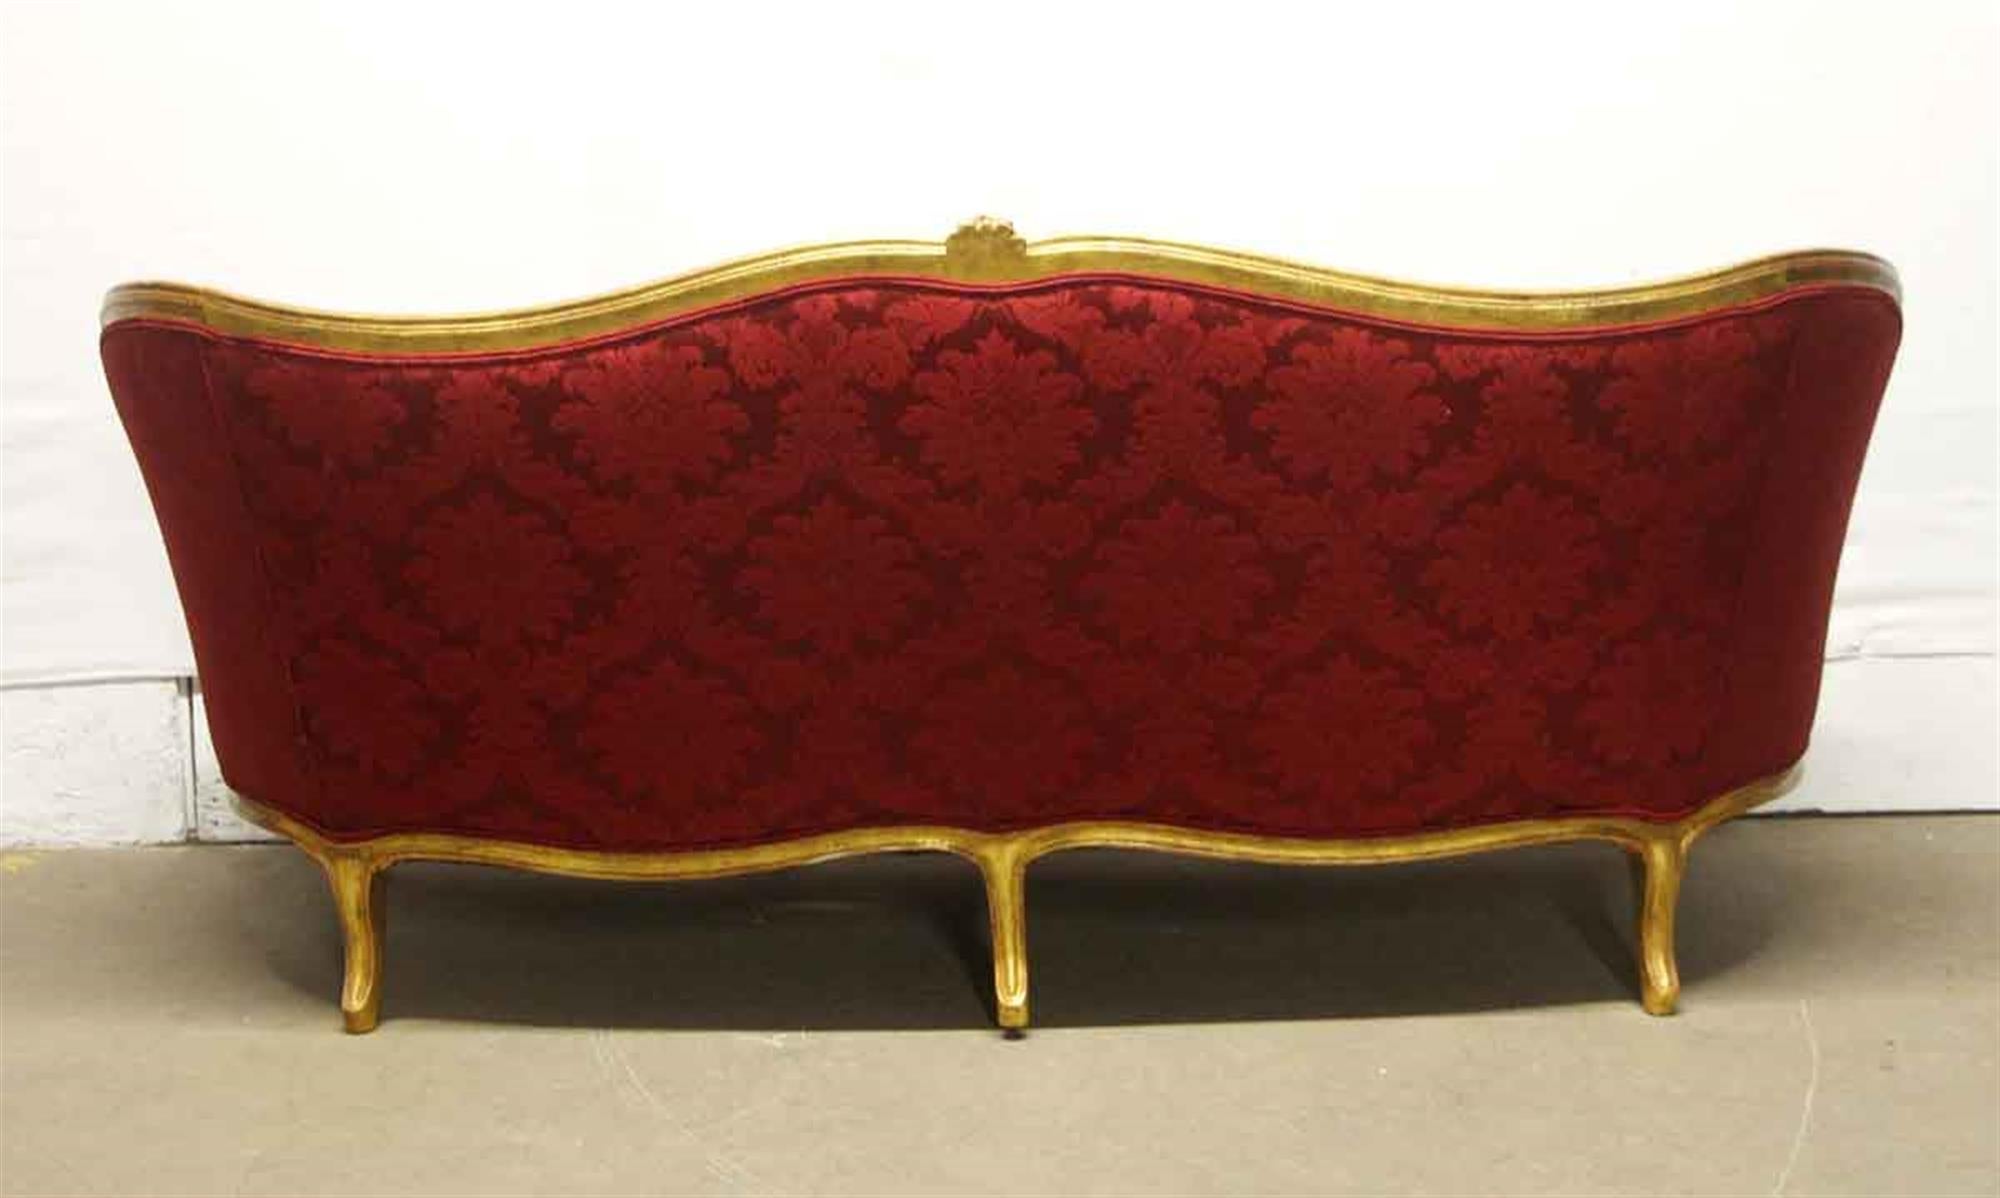 1890s Gilded Carved Wood Sofa Couch with Red Floral Upholstery 1